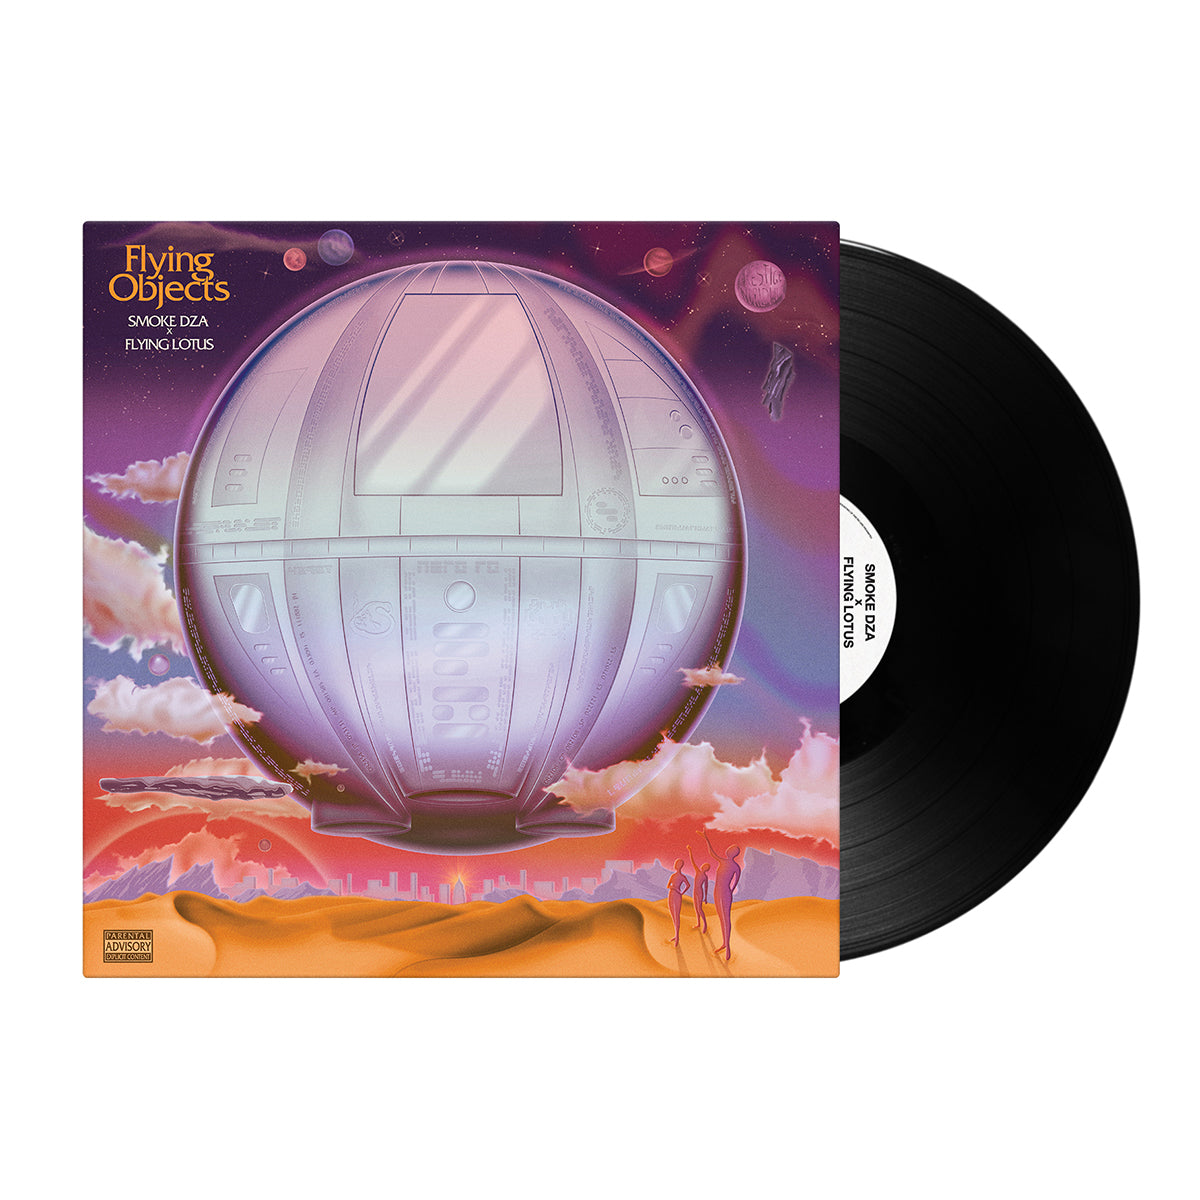 Flying Objects LP